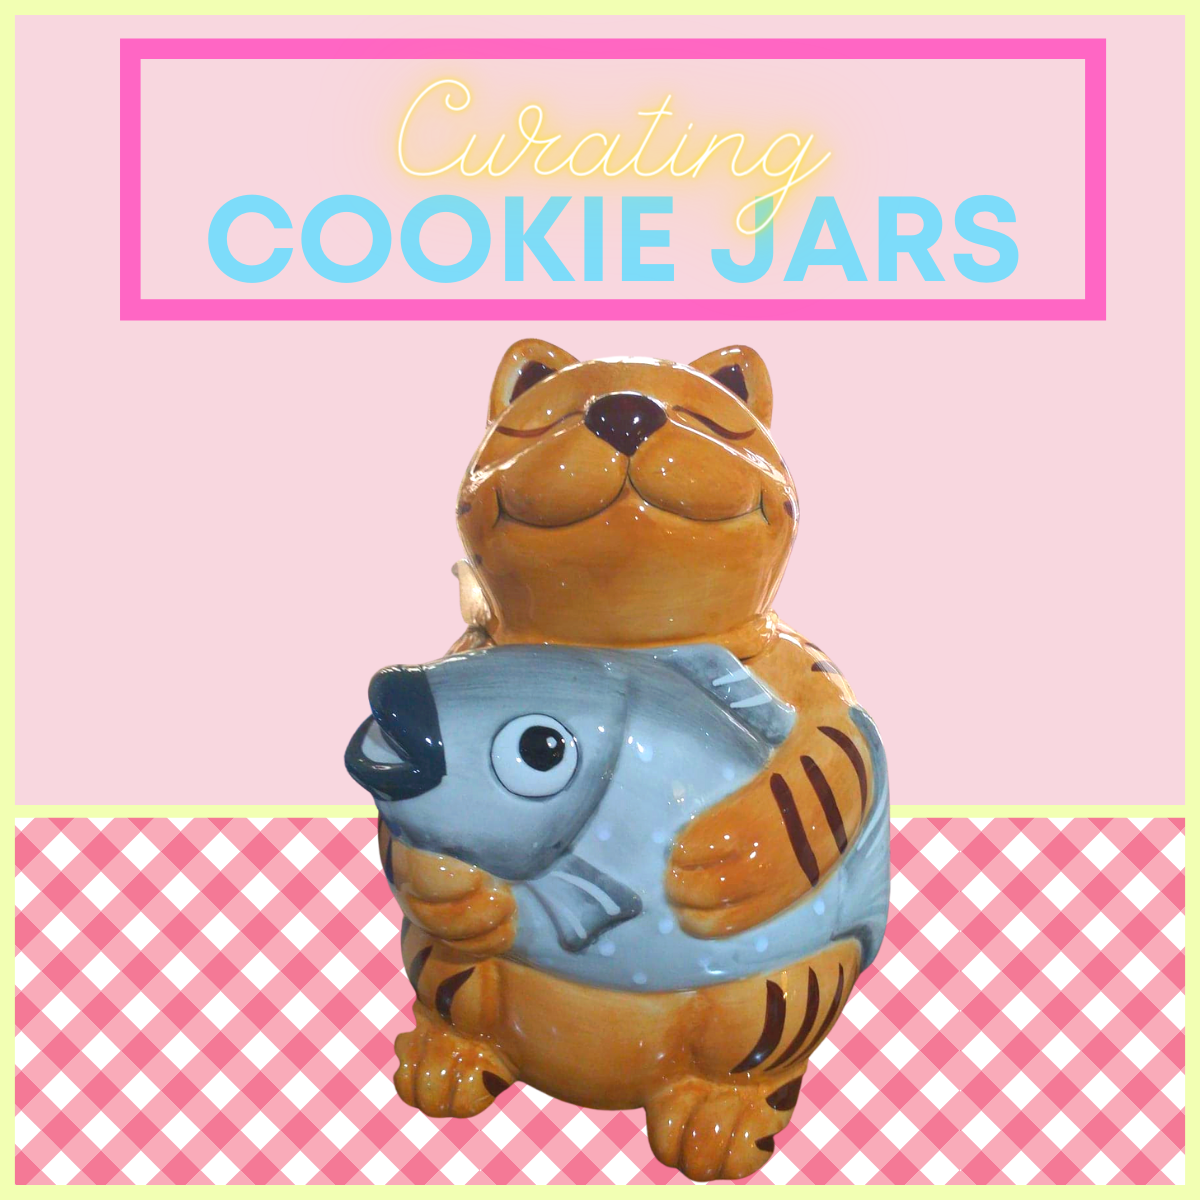 a-collection-of-cookie-jars